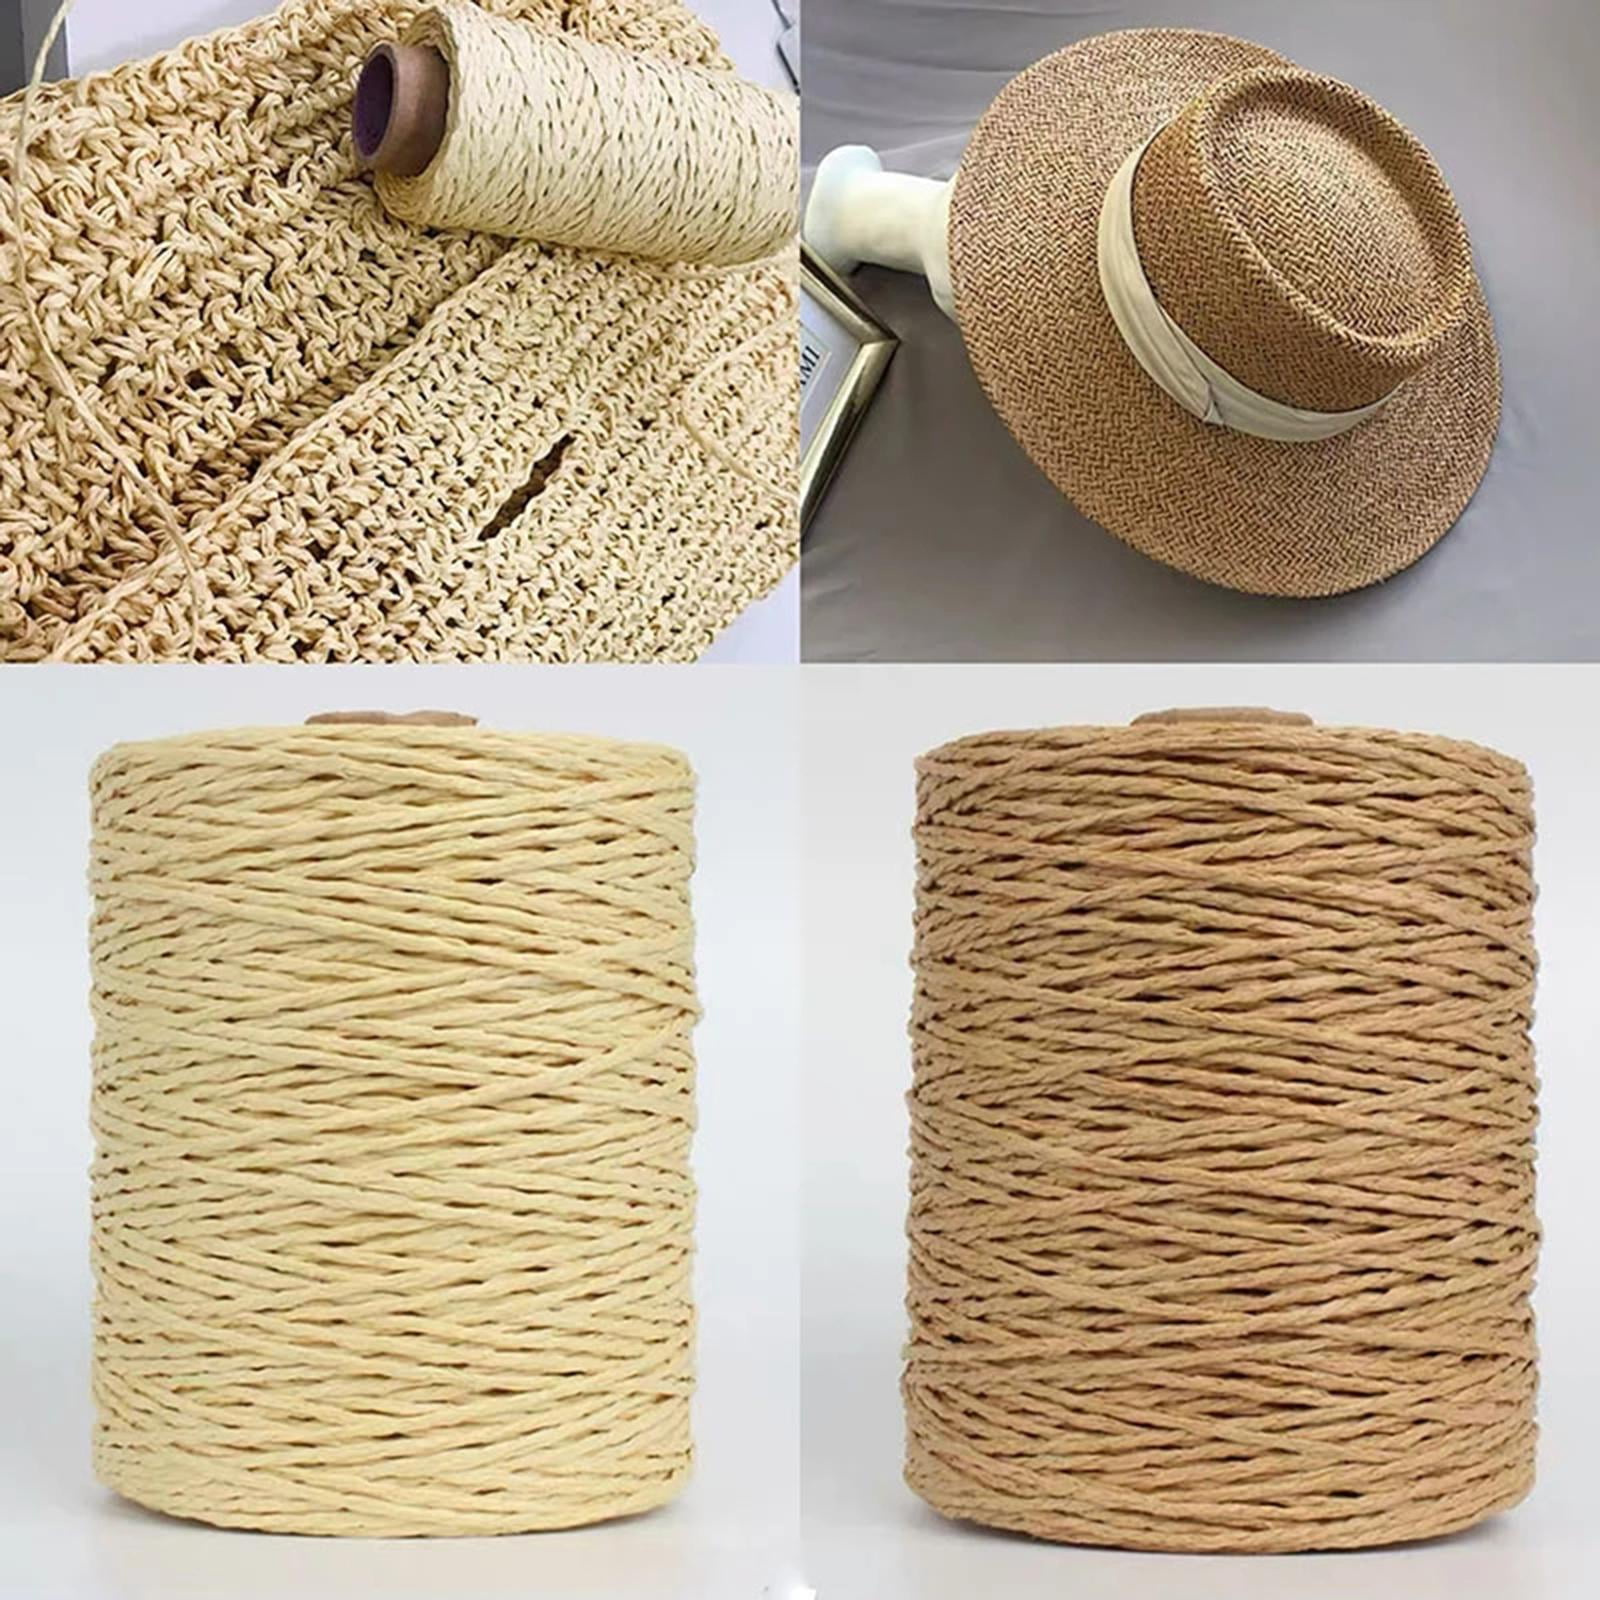 Natural Diy Hand Woven Bag Paper Rope Material, Hat Making Supplies (200ft  Rope, 1 Crochet Needle Included)